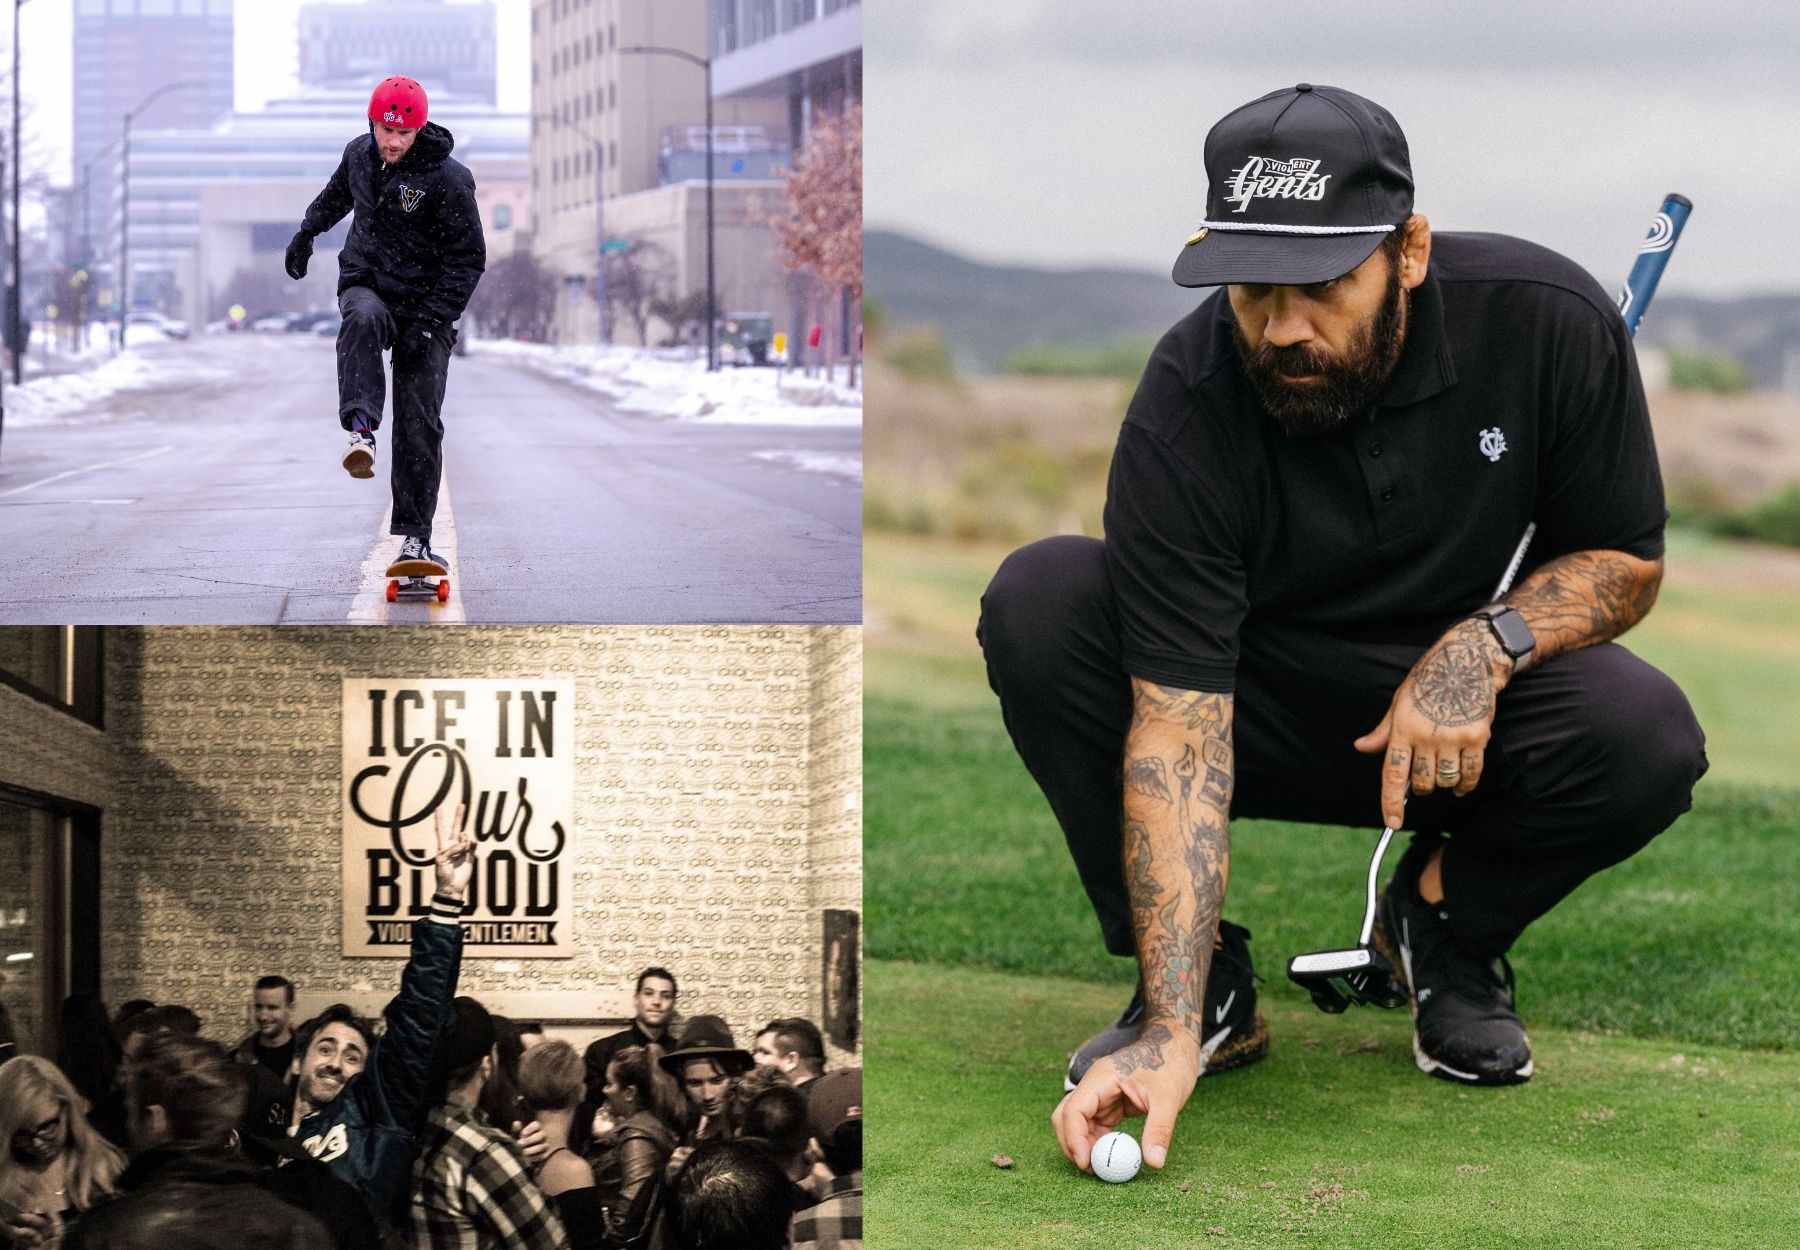 Don't miss fun partnerships, such as the Lifetipsforbetterliving x Mike Vallely, the Tim Hendrick/VGHC event or their new golf line.